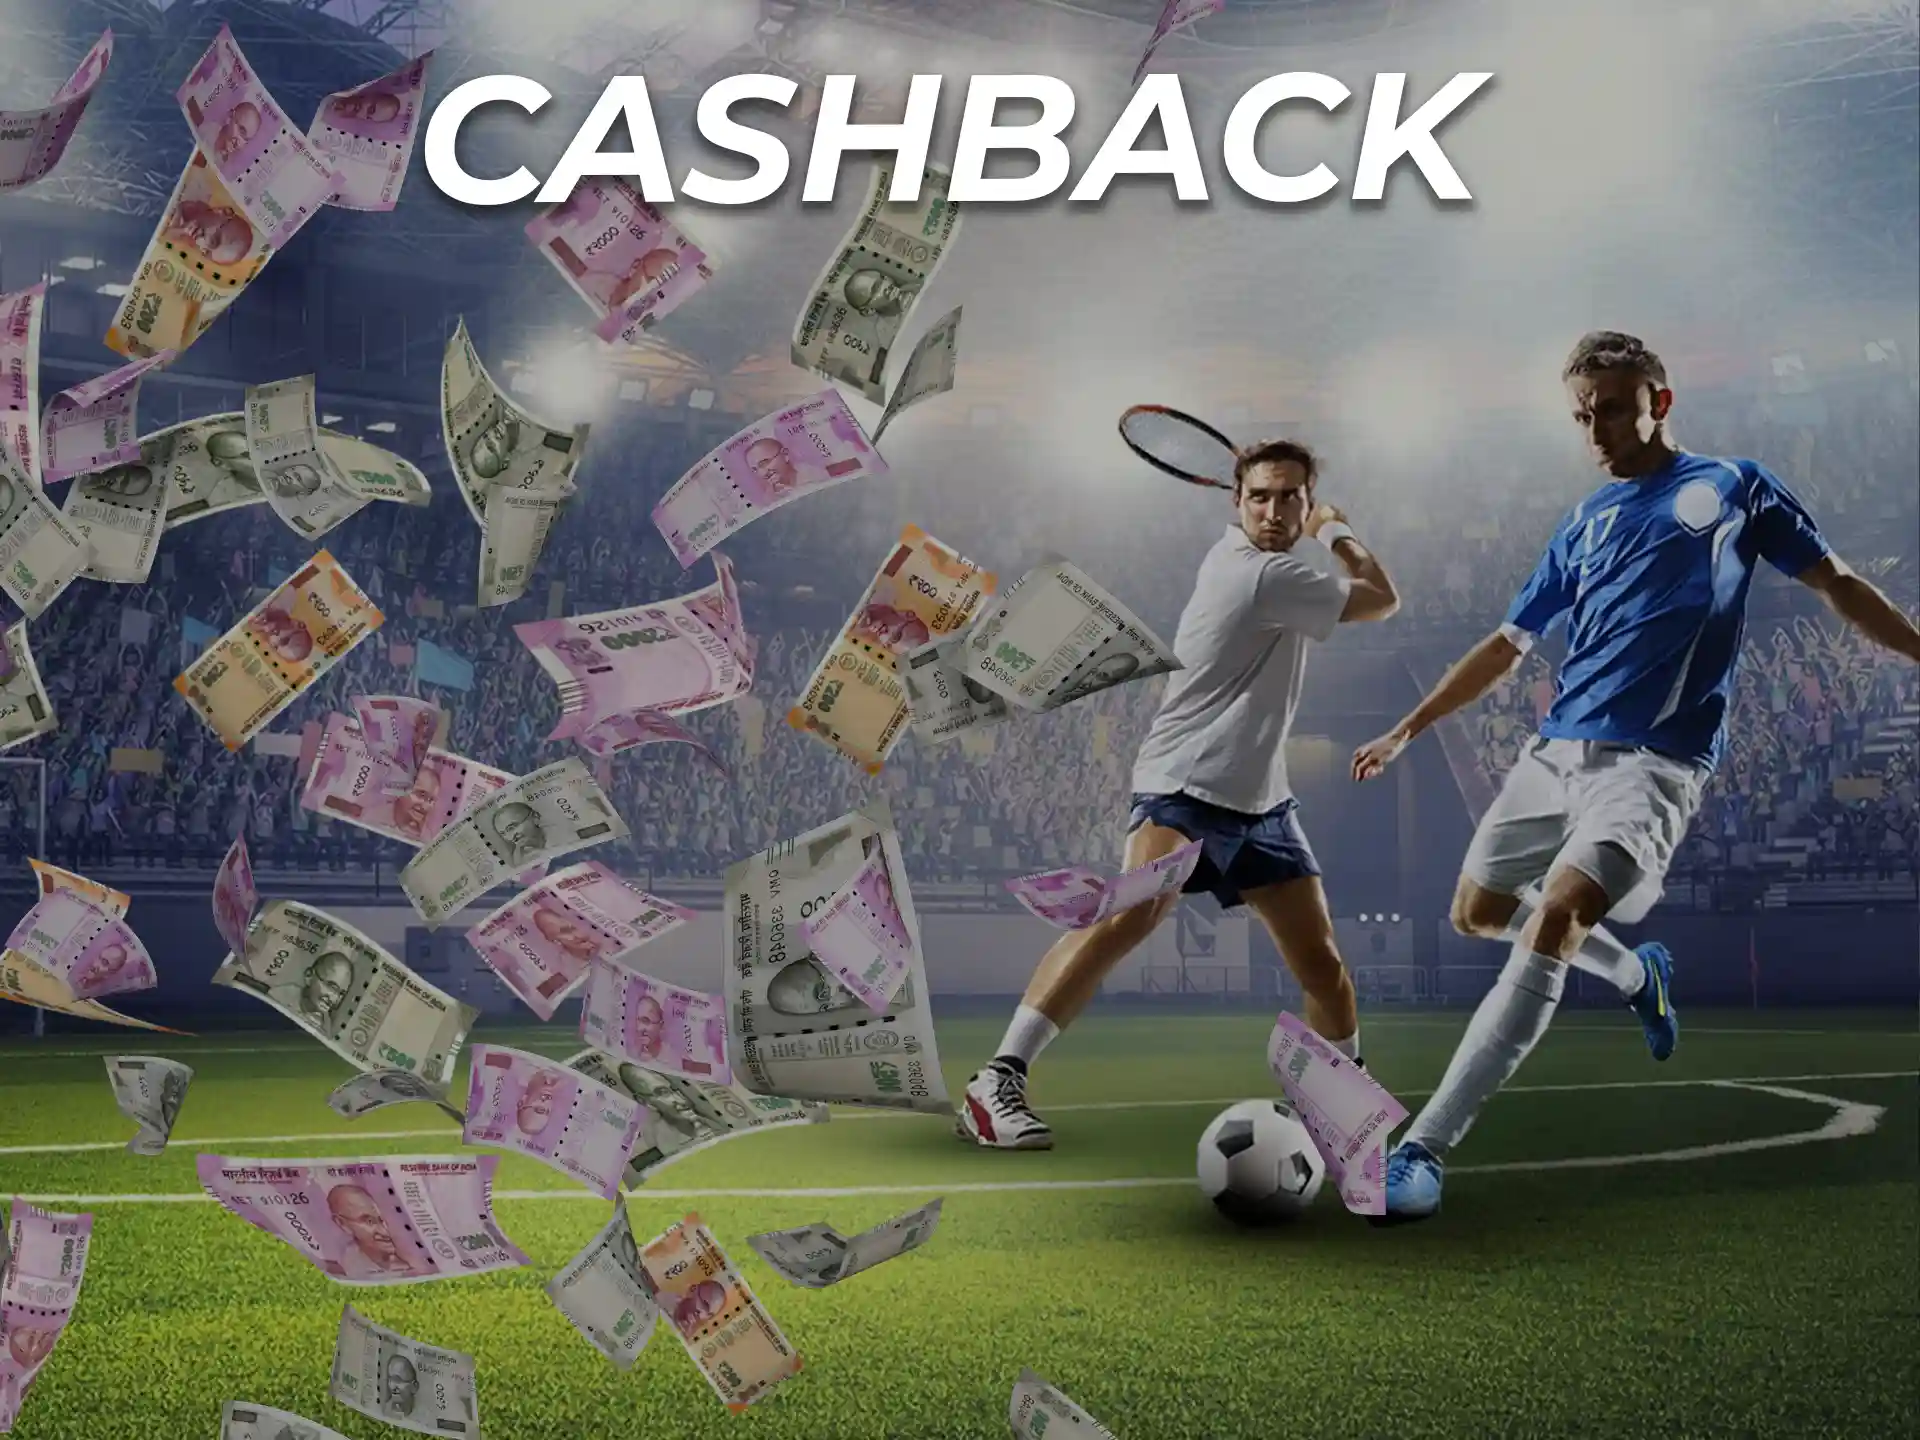 The Cashback Bonus allows players to recoup some of their losses and continue betting.